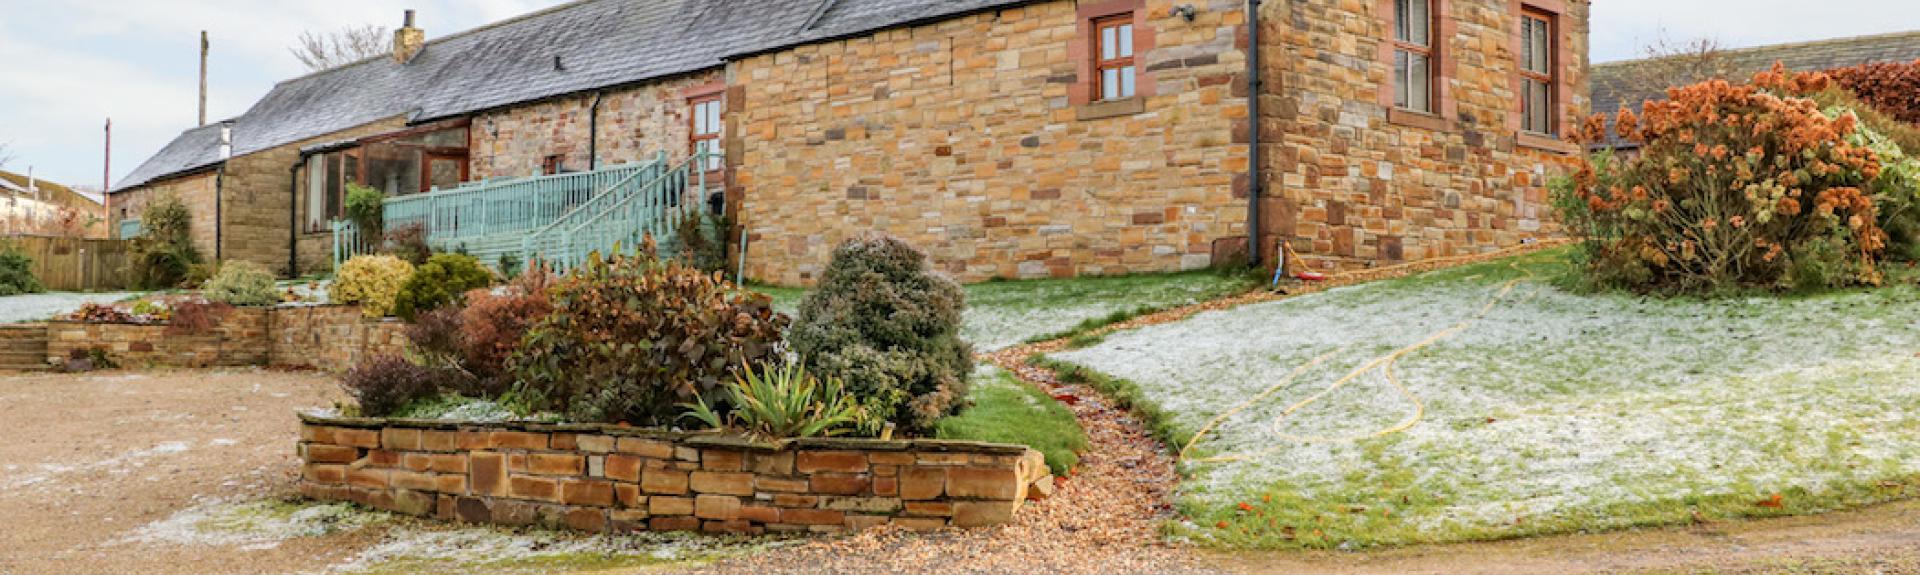 A single-storey, stone-built barn conversion in Cumbria with parking spaces and lawns.